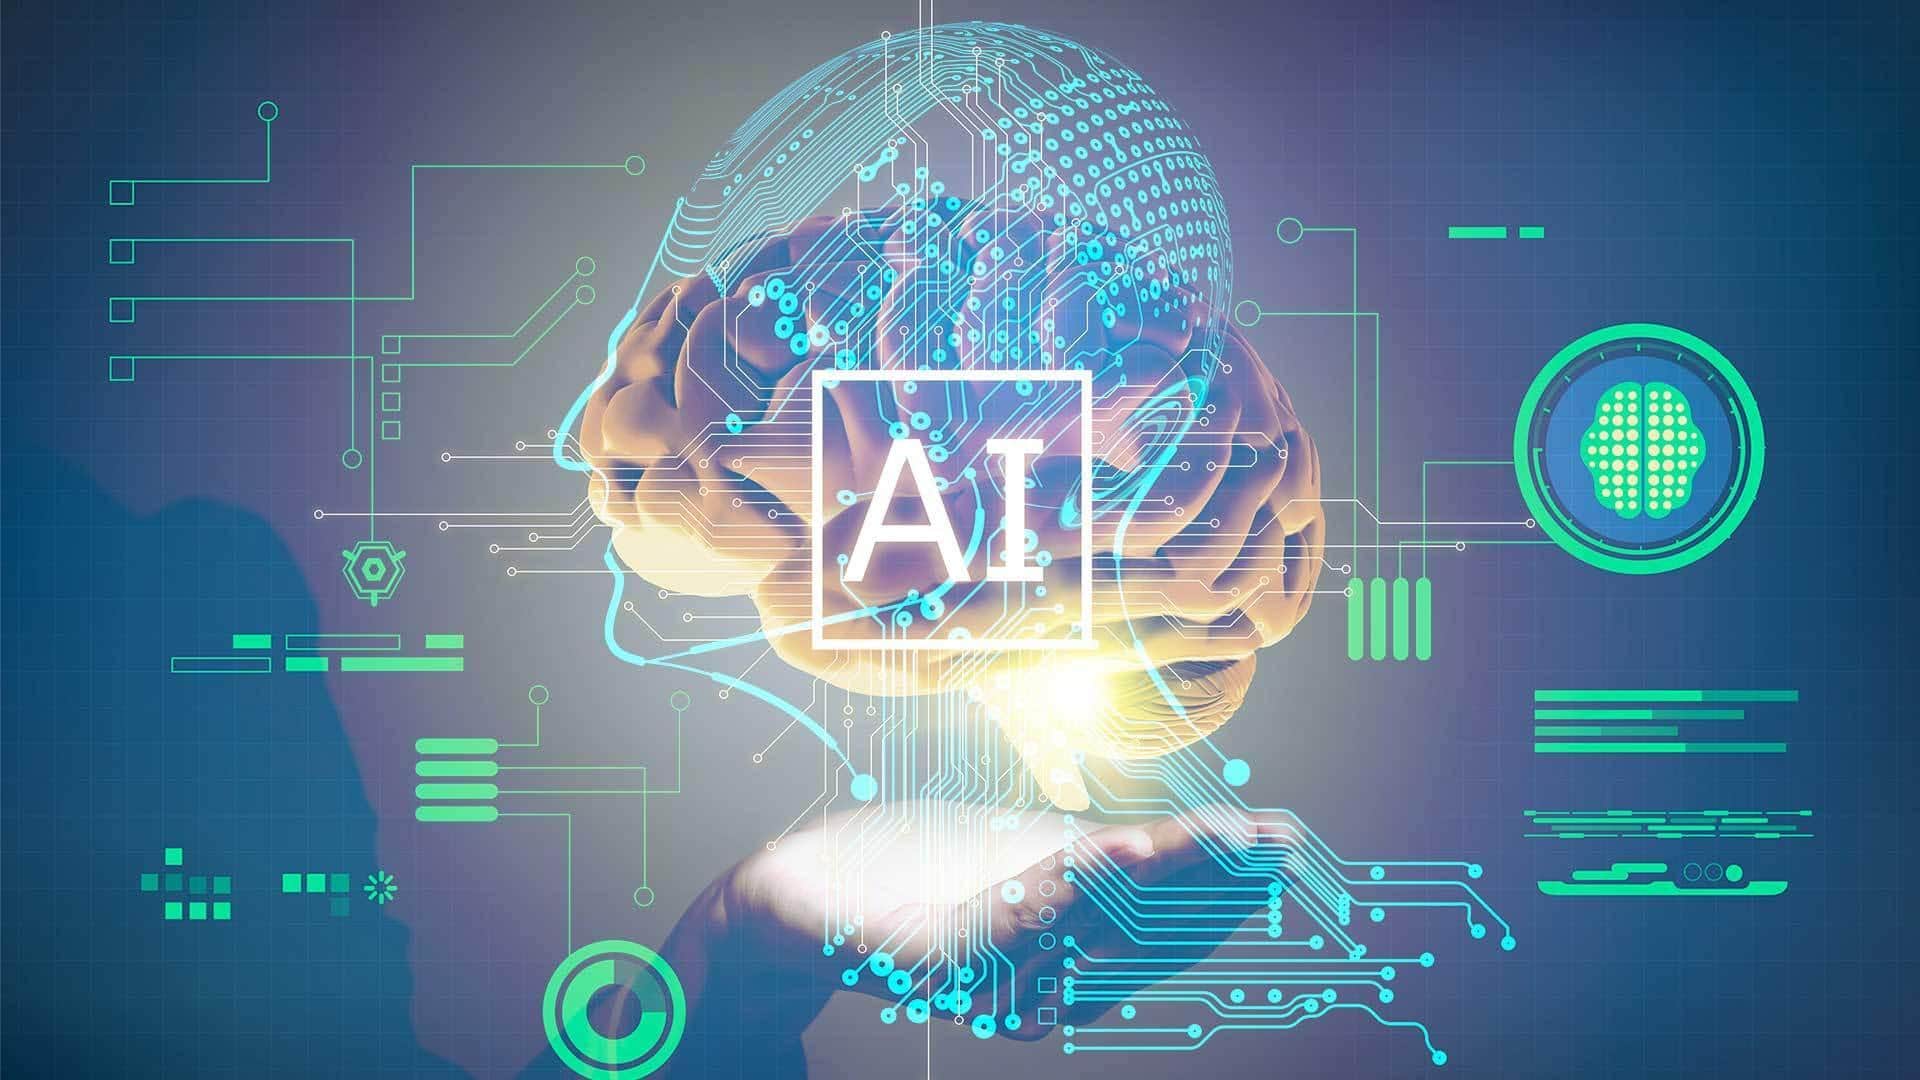 Tech giants partner to build open-source AI tools for businesses